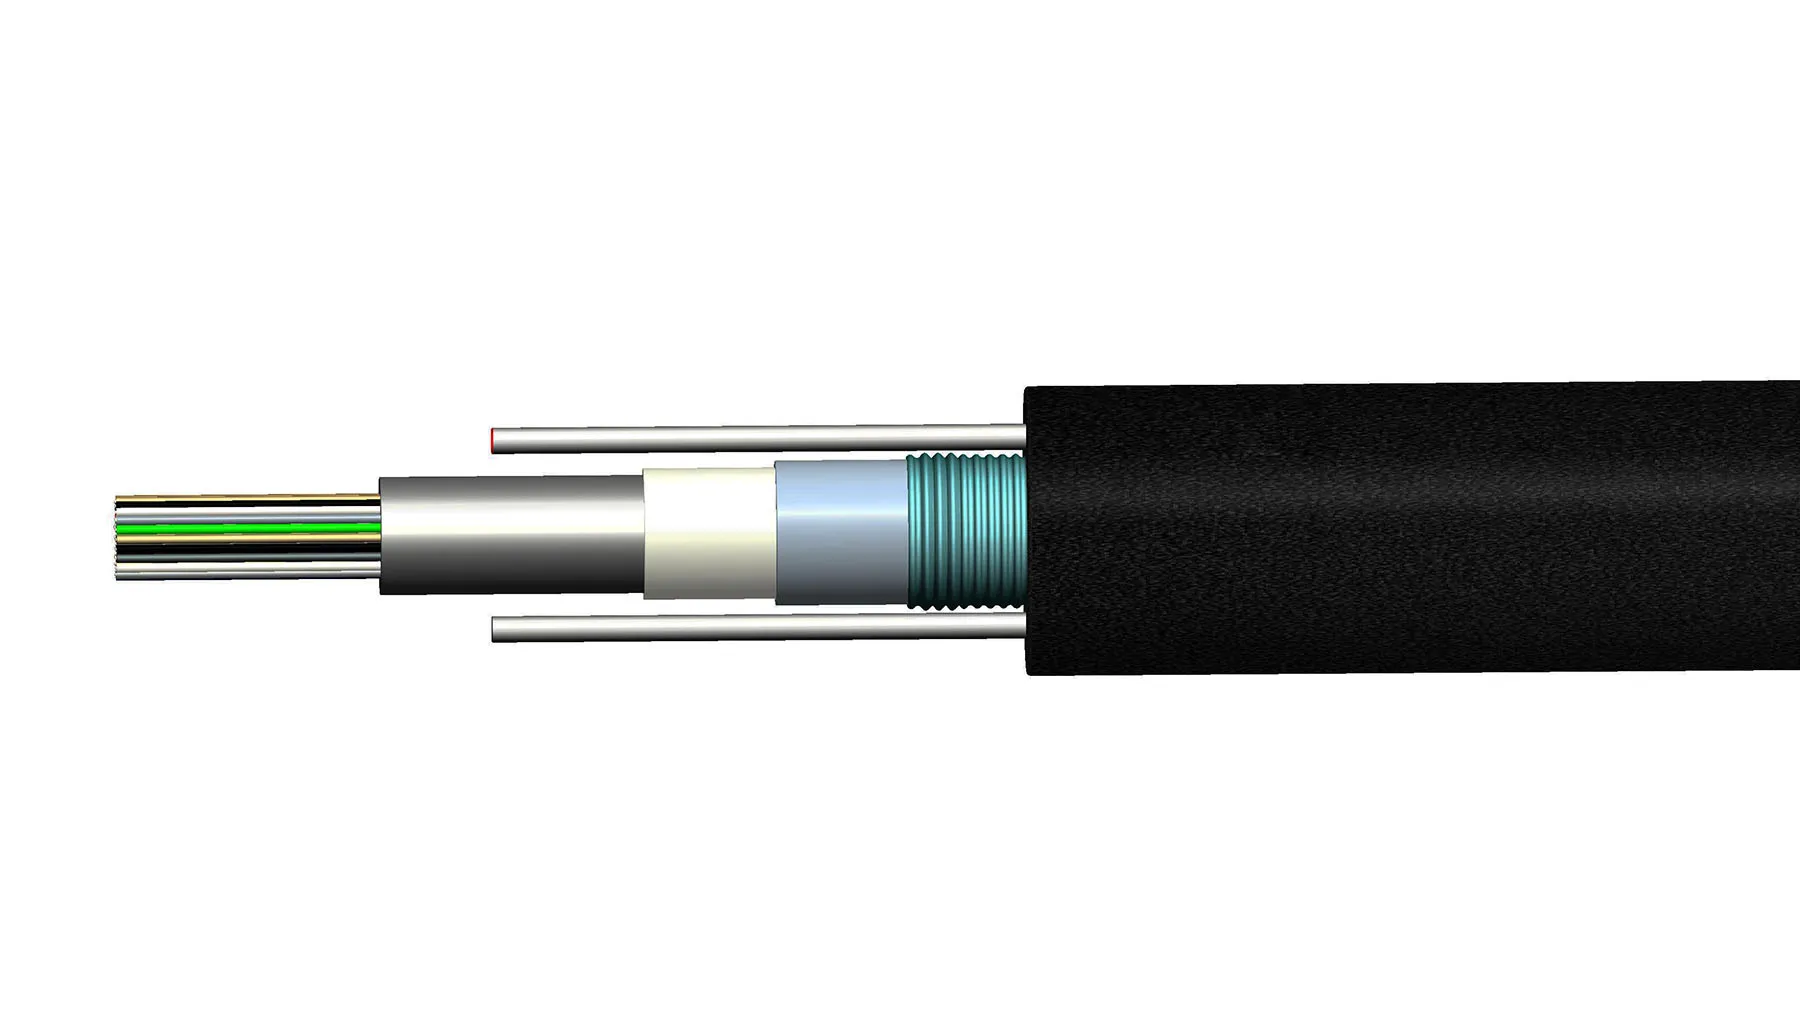 2 4 6 8 16 24 Aerial Armoured Outdoor Gyxtw 1km 2km Price G652d Single Mode 12 Core Fiber Optic Cable